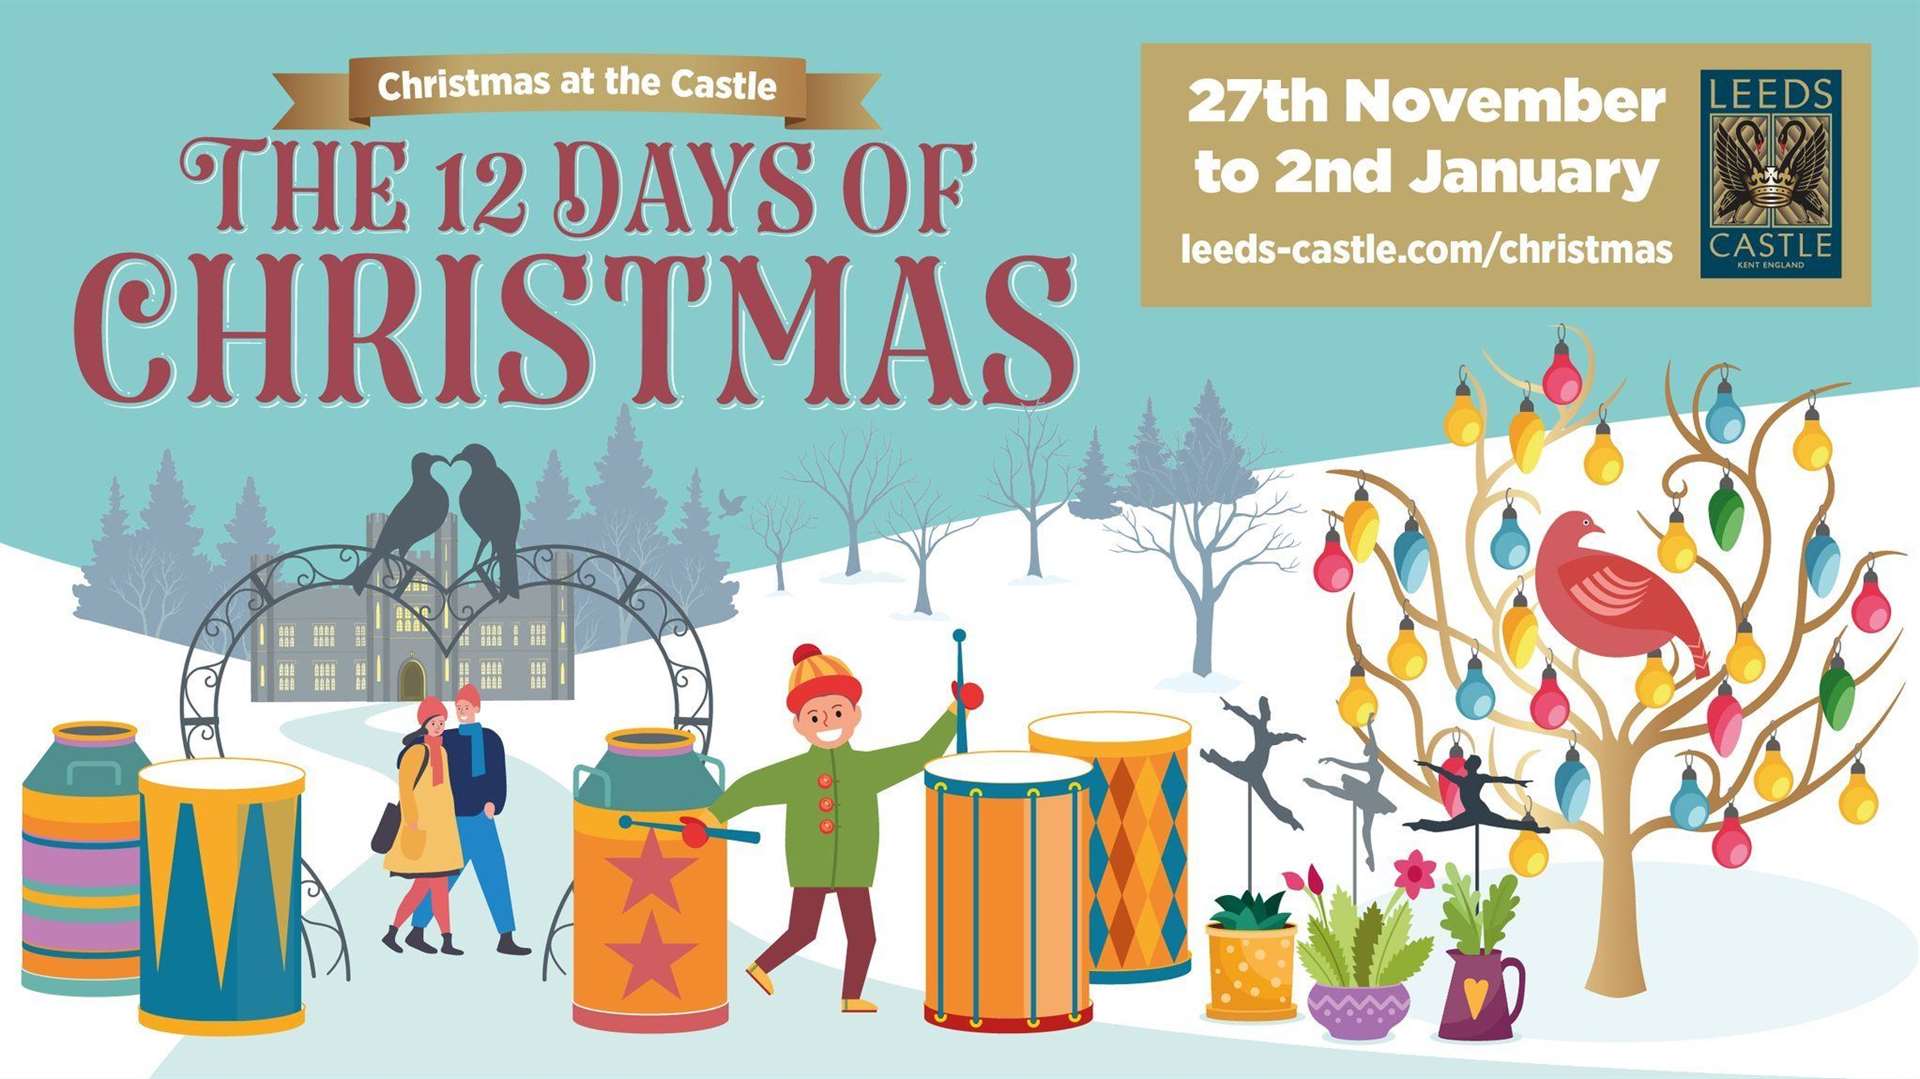 Leeds Castle will be celebrating the Twelve Days of Christmas Picture: Leeds Castle